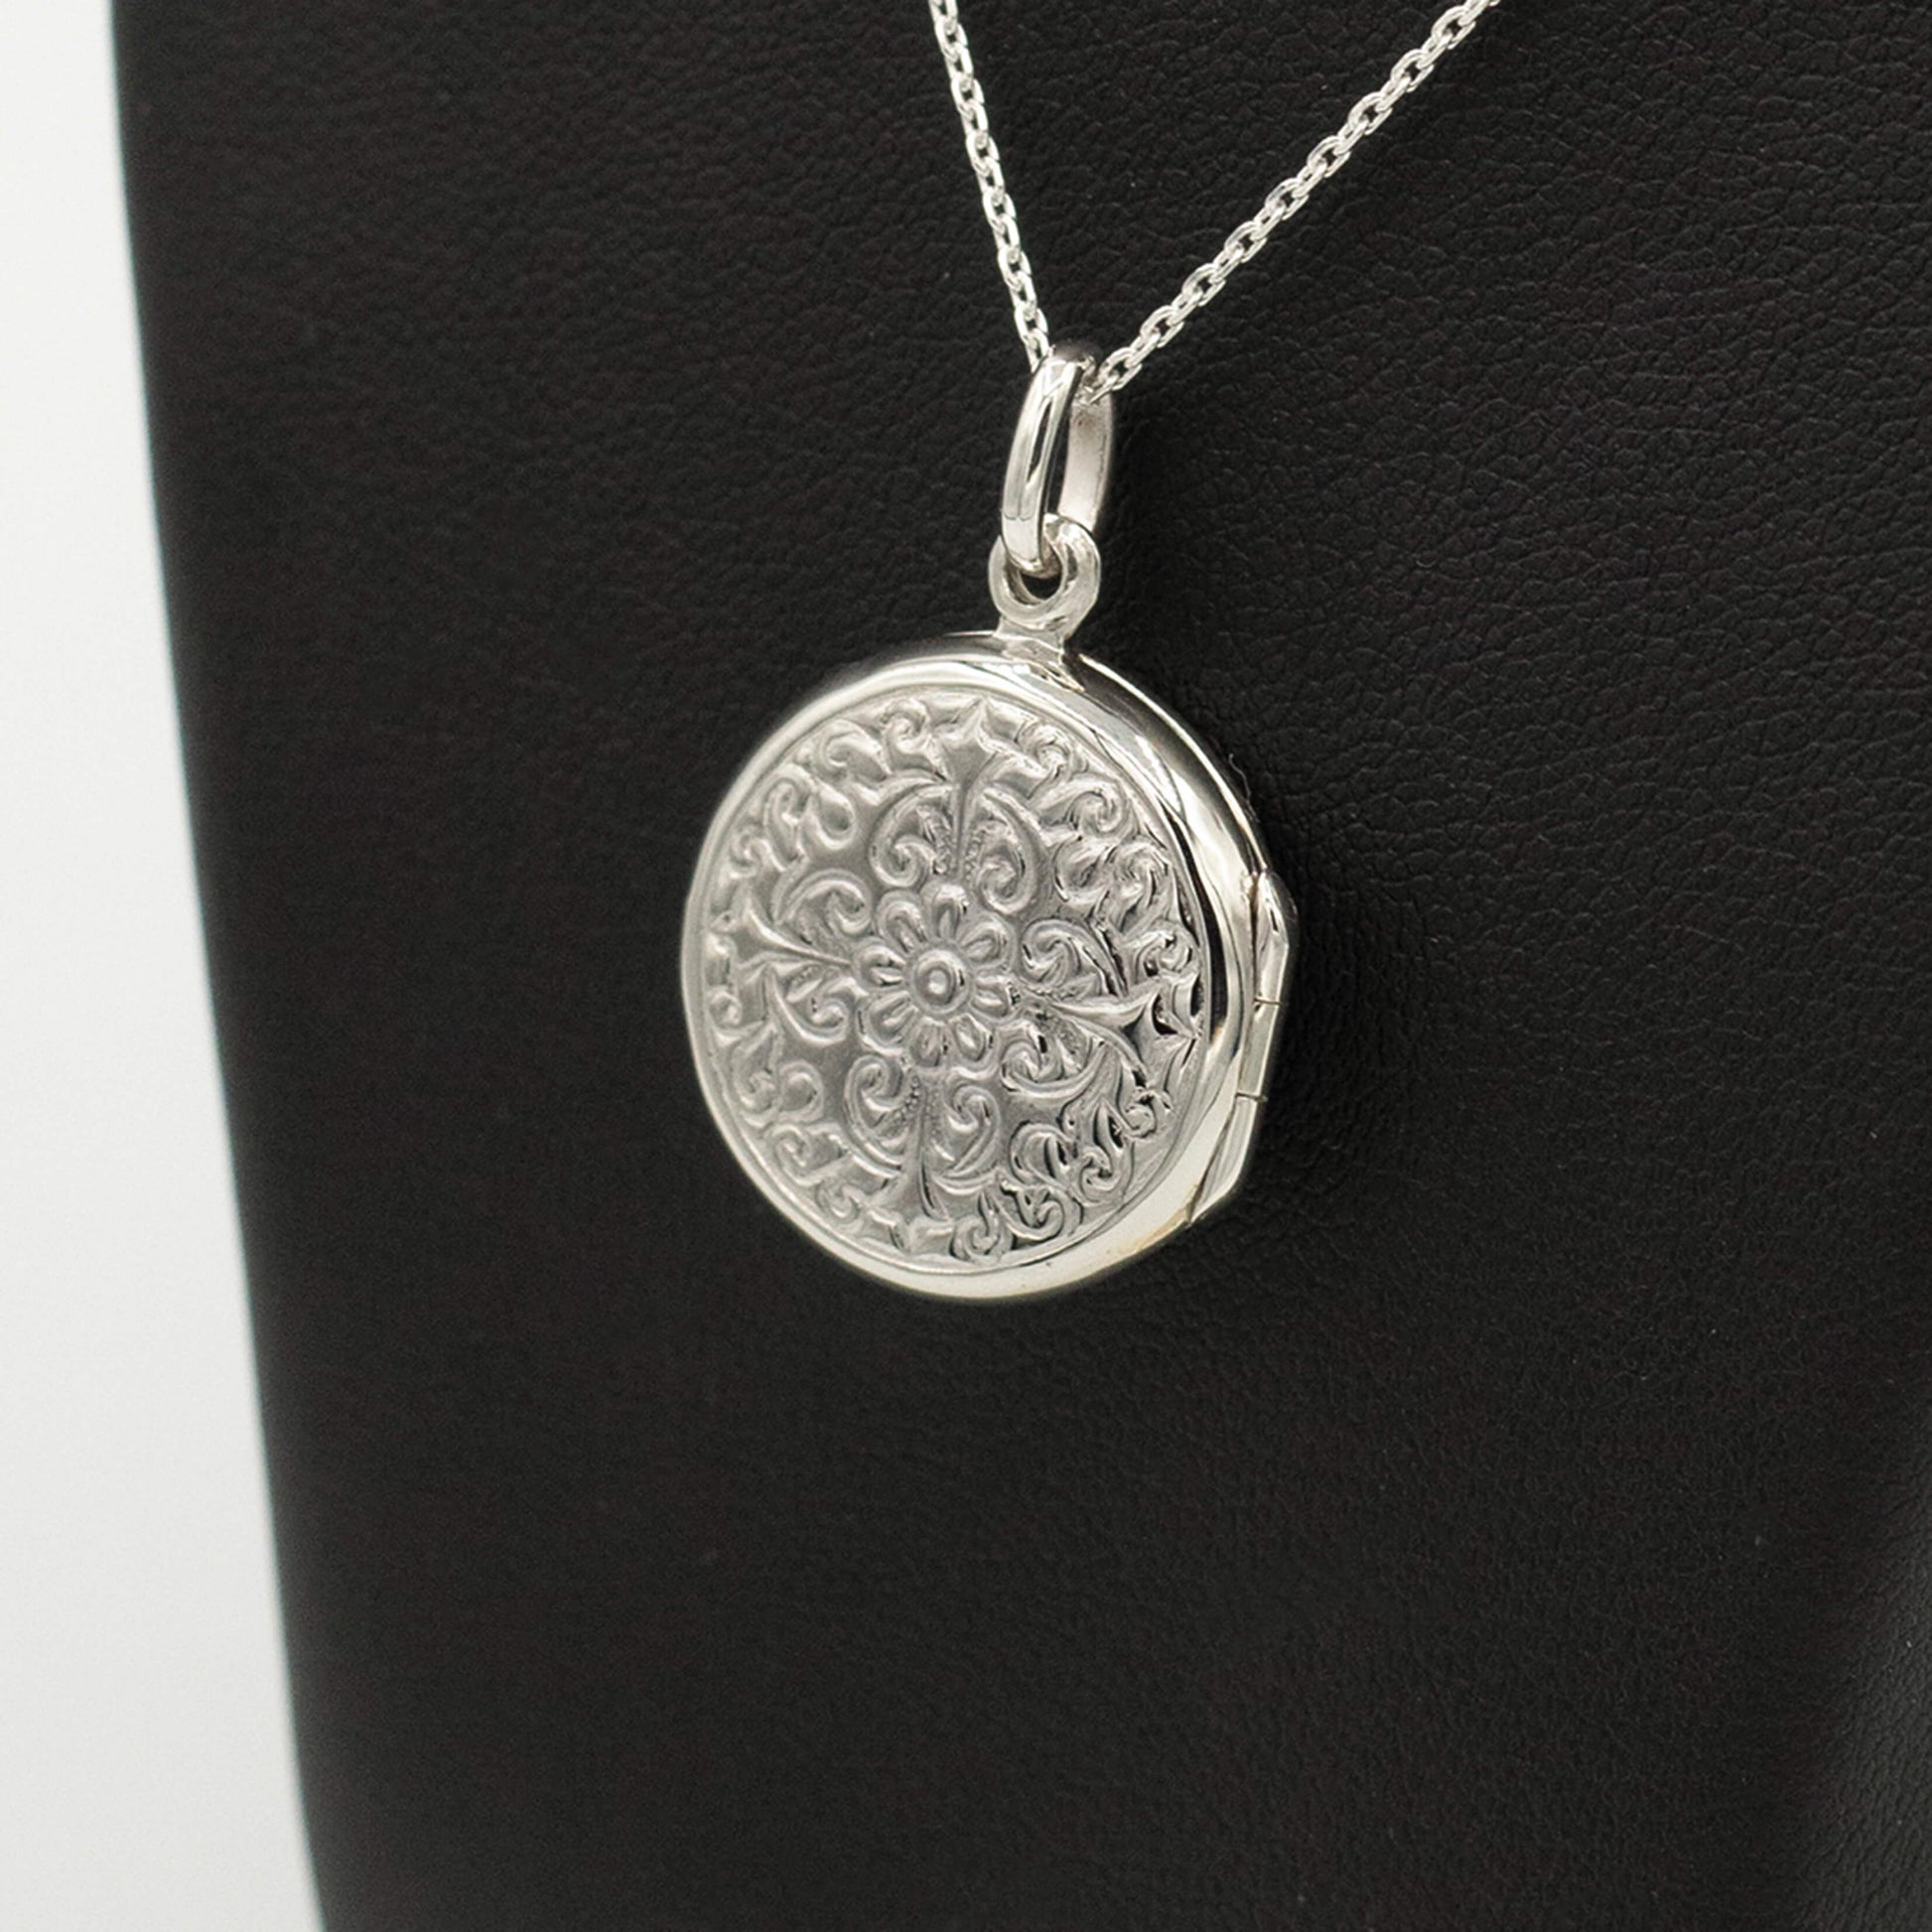 side on view of sterling silver round shaped locket with intricate ornate design